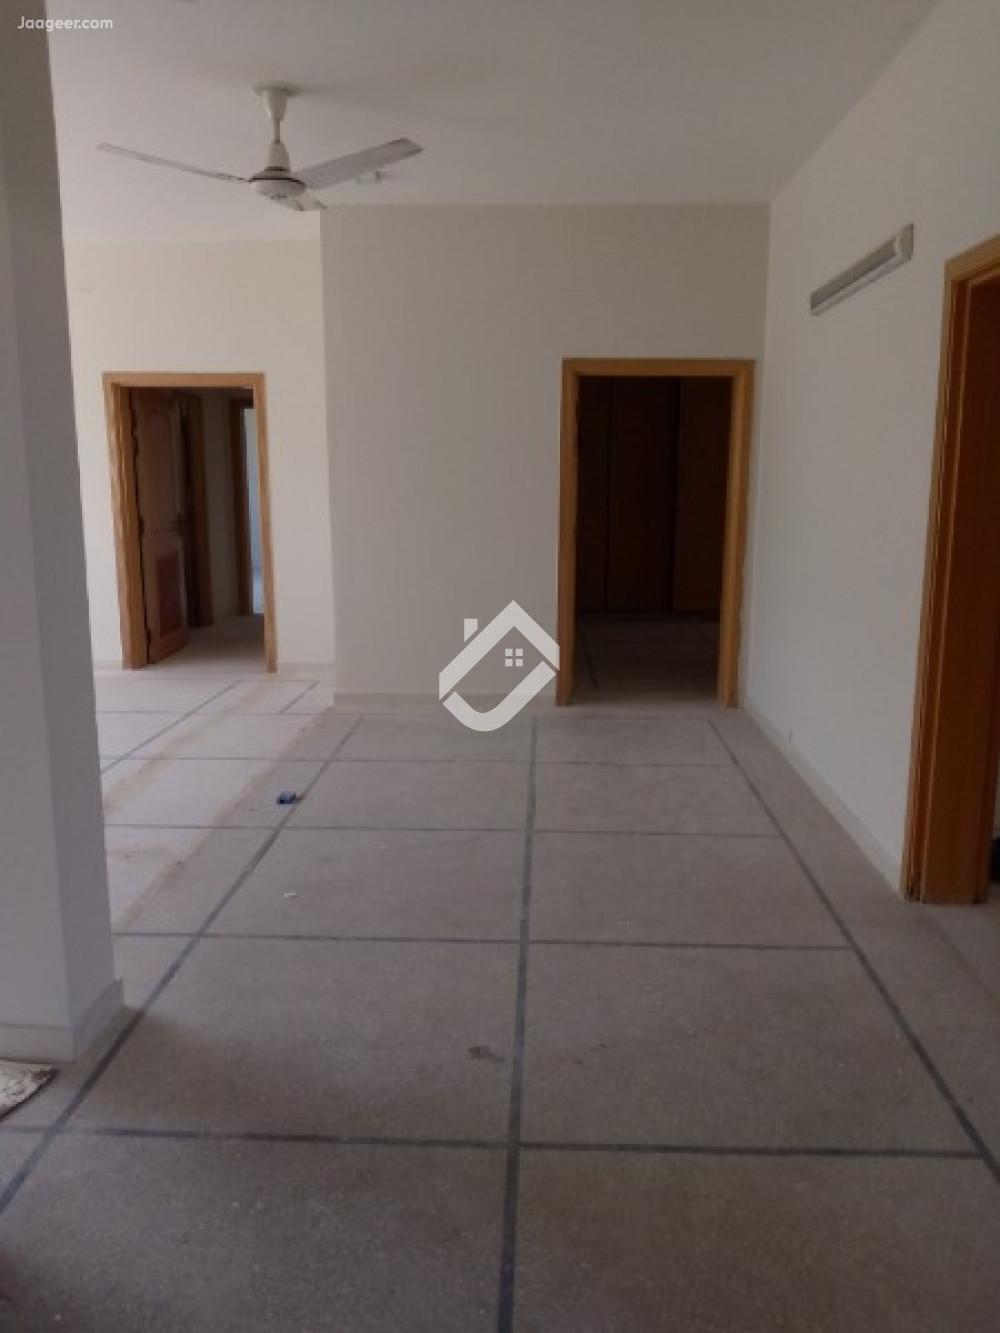 View  1 Kanal Lower Portion For Rent In DHA Phase II in DHA Phase 2, Islamabad